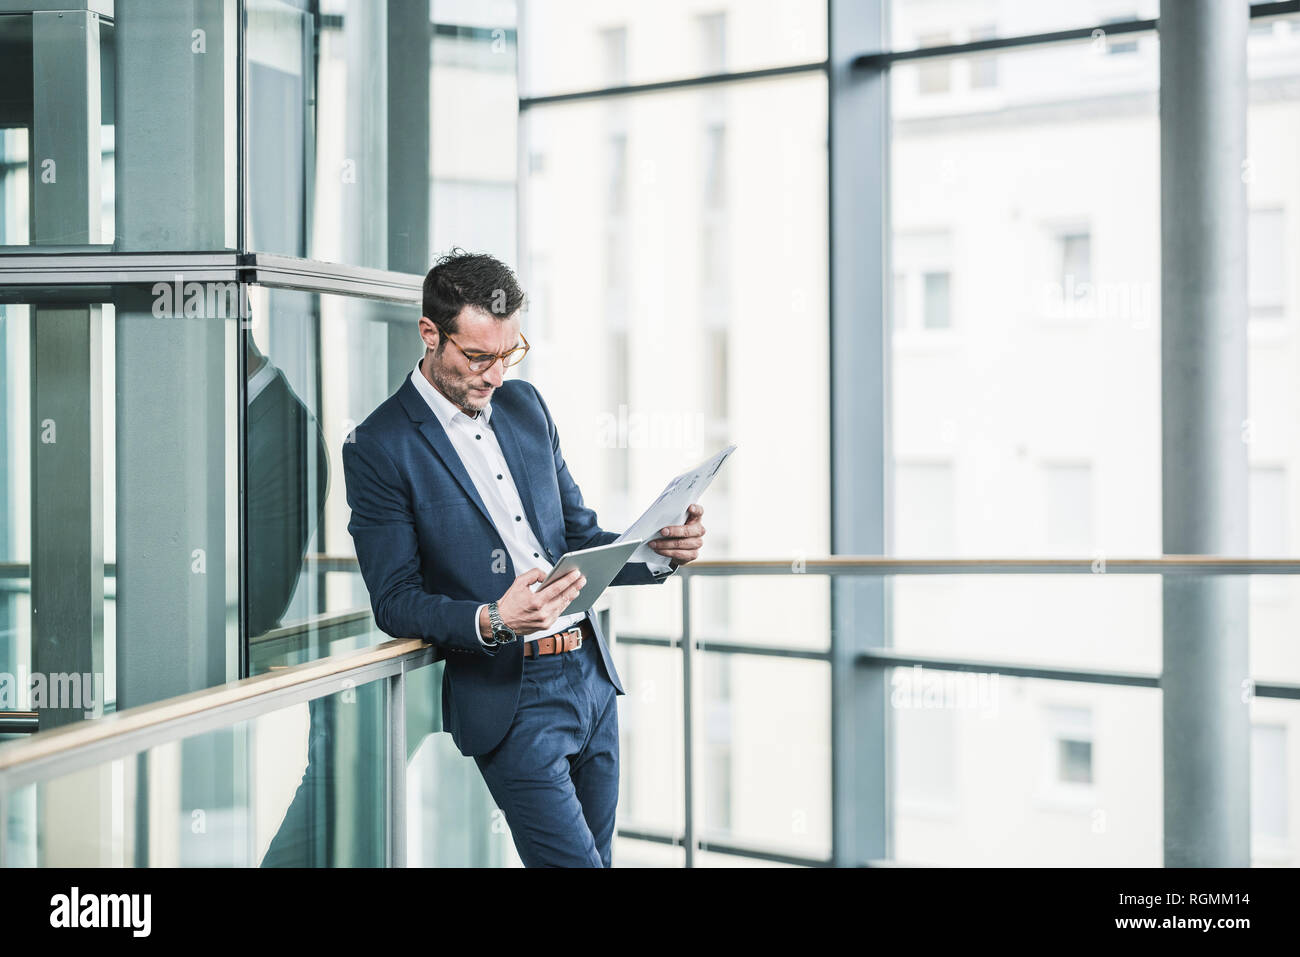 Businessman standing in office building, using digital tablet Stock Photo